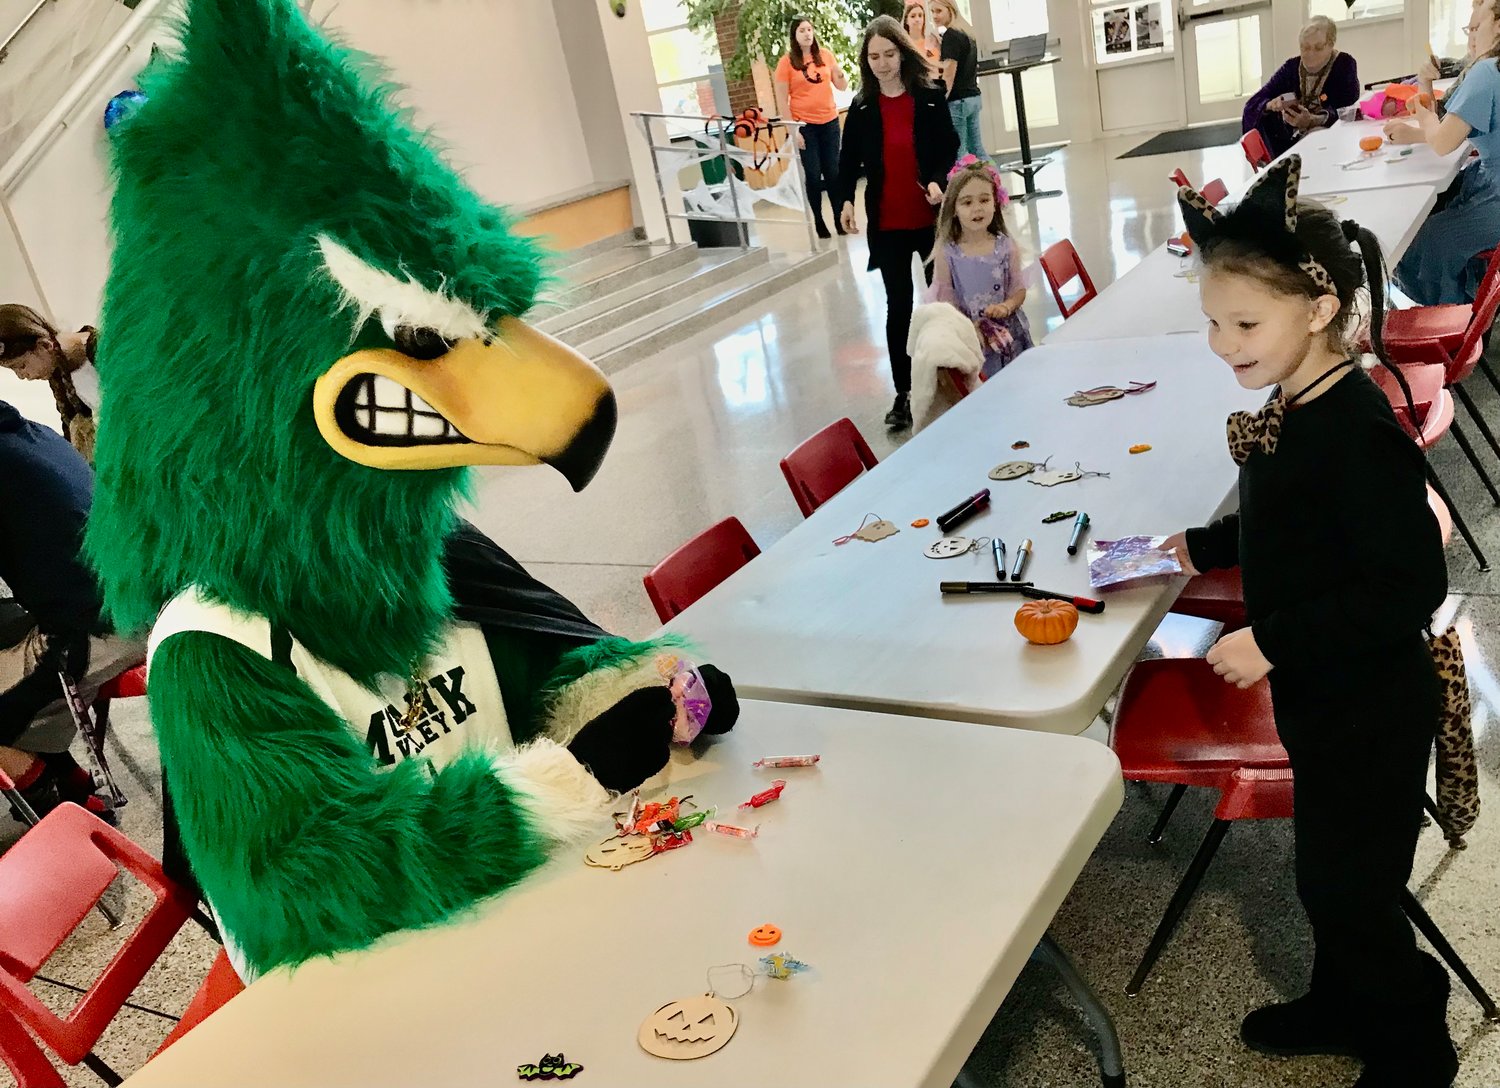 Joslin Yukna, right, of Deerfield chats with Mohawk Valley Community College mascot 'Mo' Oct. 29 during the Halloween Celebration held on its Utica campus for area families.